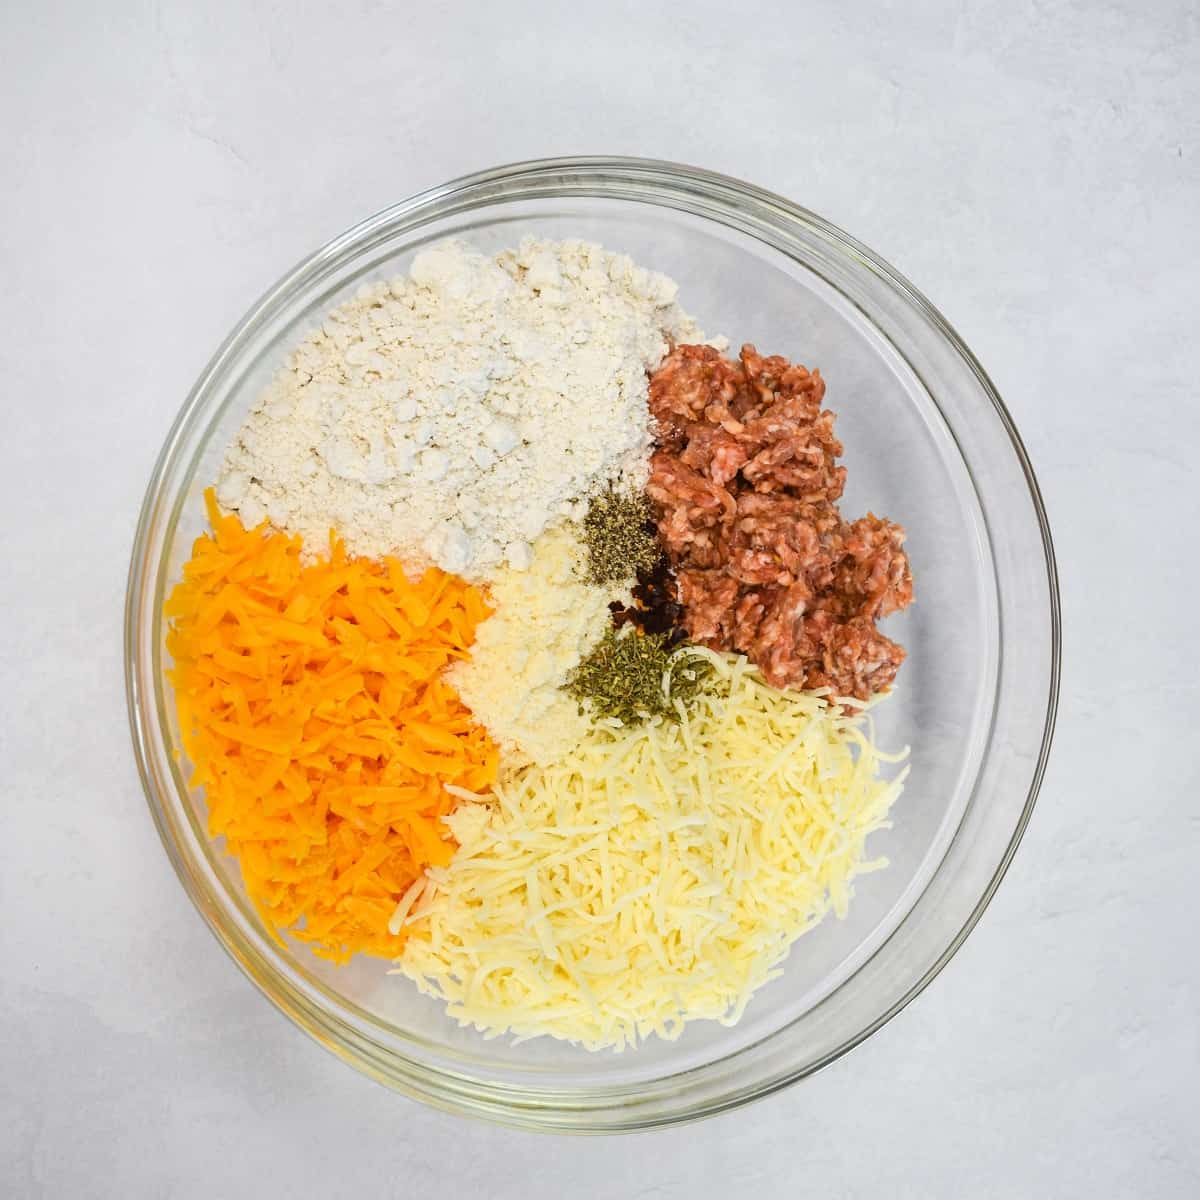 The ingredients in a large glass bowl before mixing.